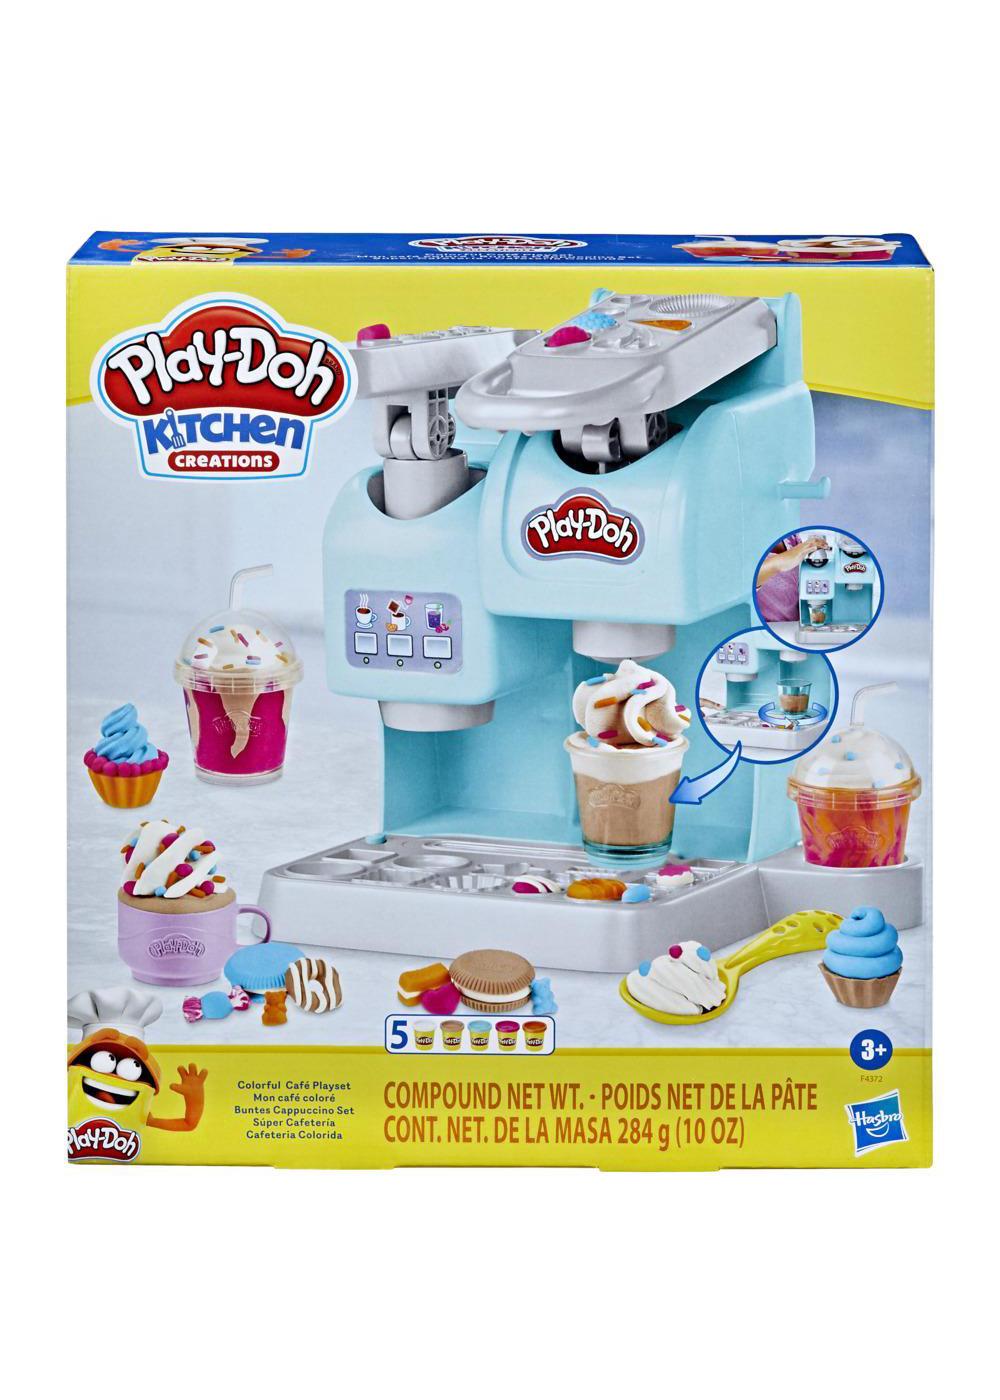 Playdoh Play-Doh Kitchen Creations Pizza Party Playset Food Cooking Toy  Play Set